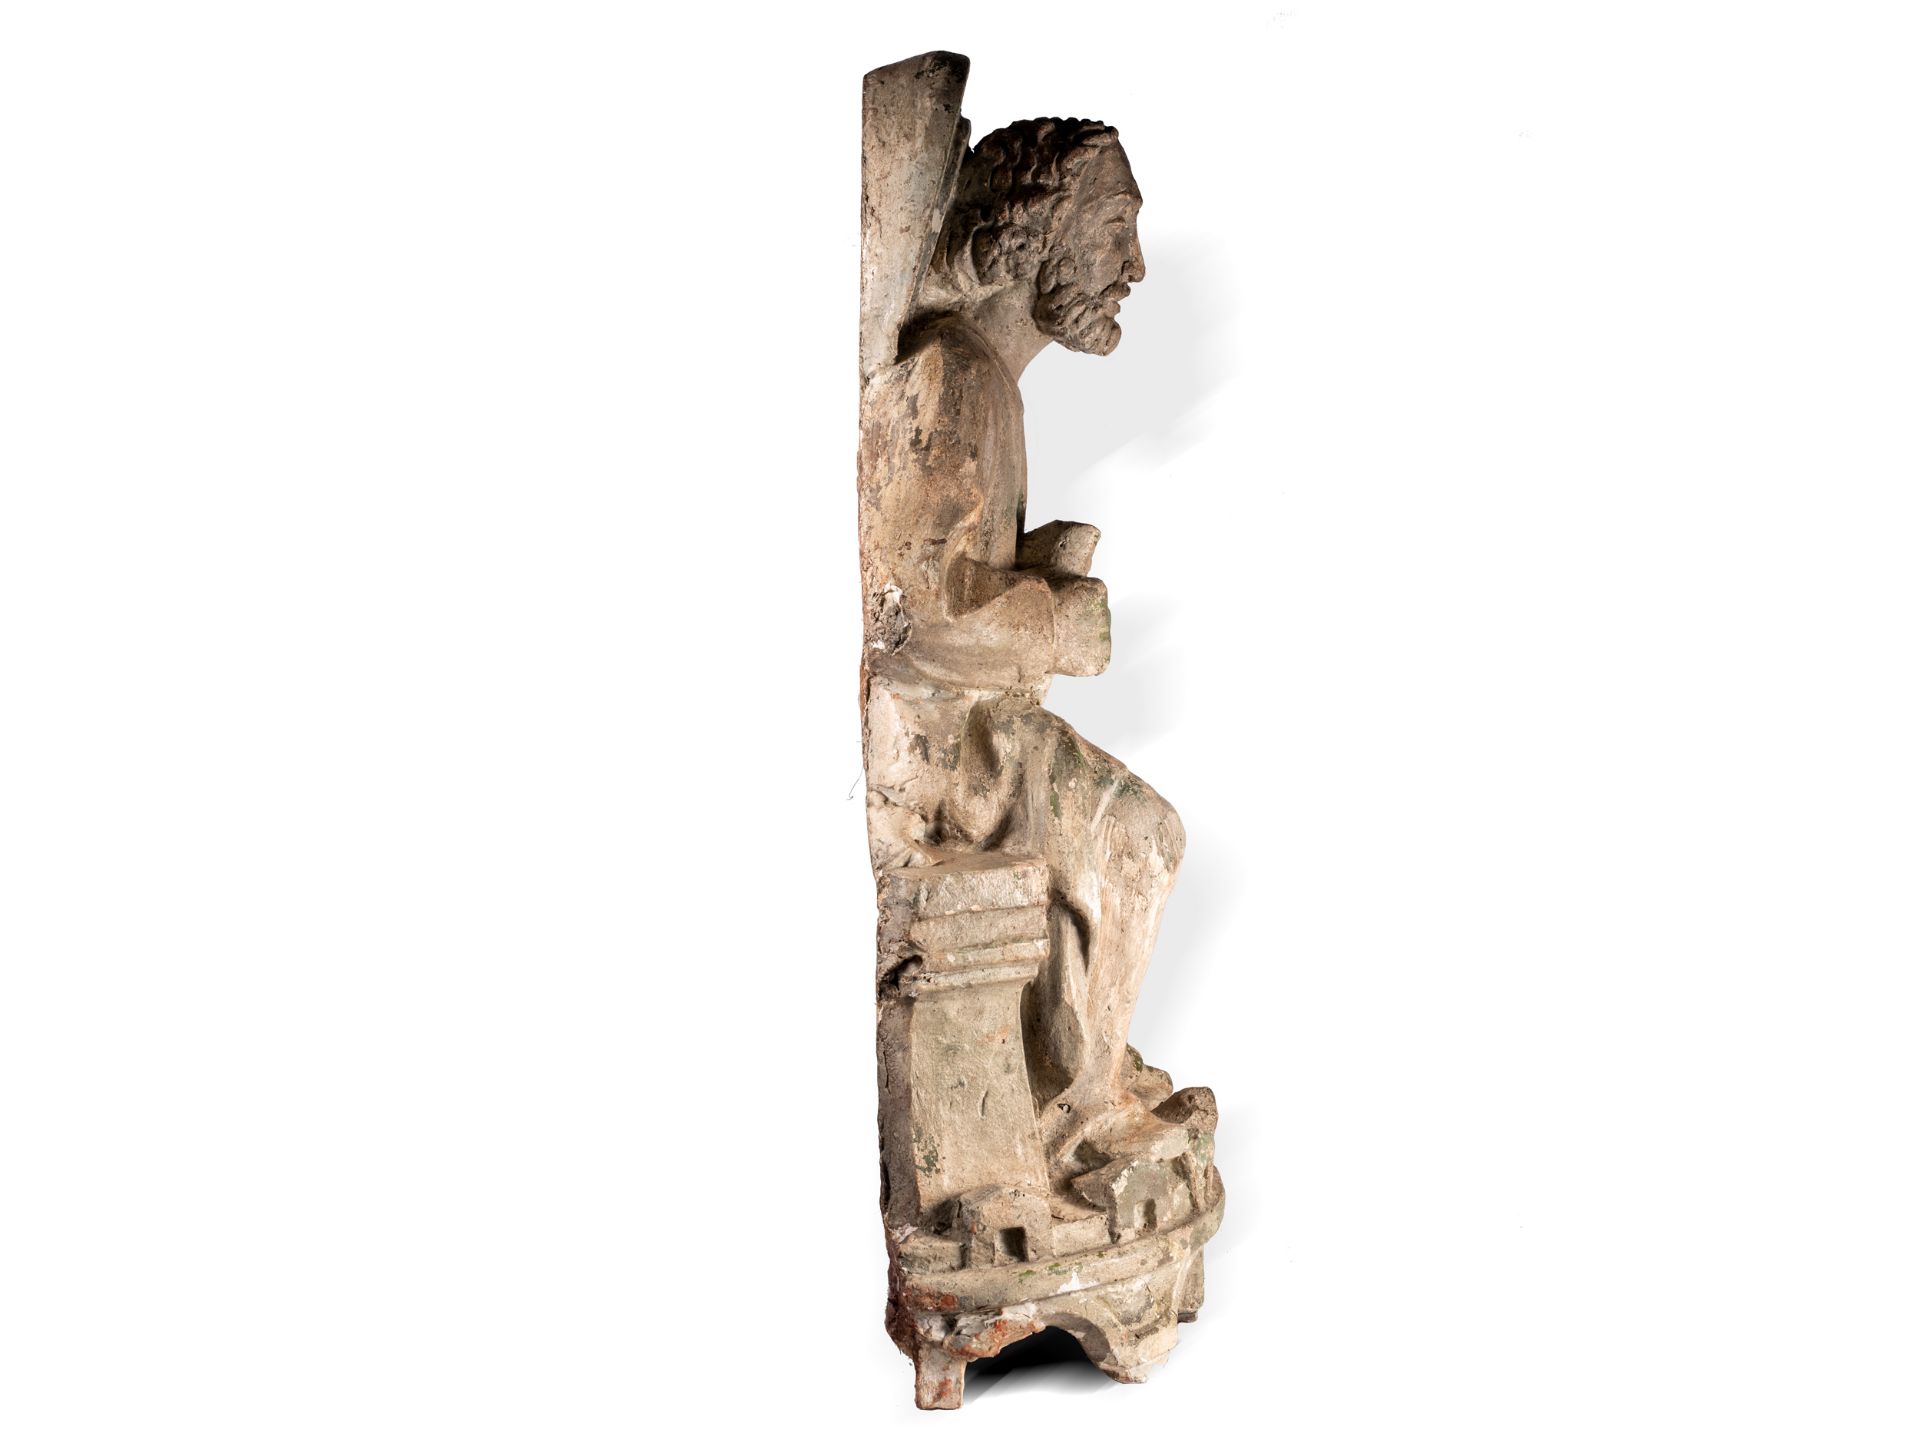 Museum sculpture of a seated apostle, Italy, In the style of the 14th century - Image 5 of 8